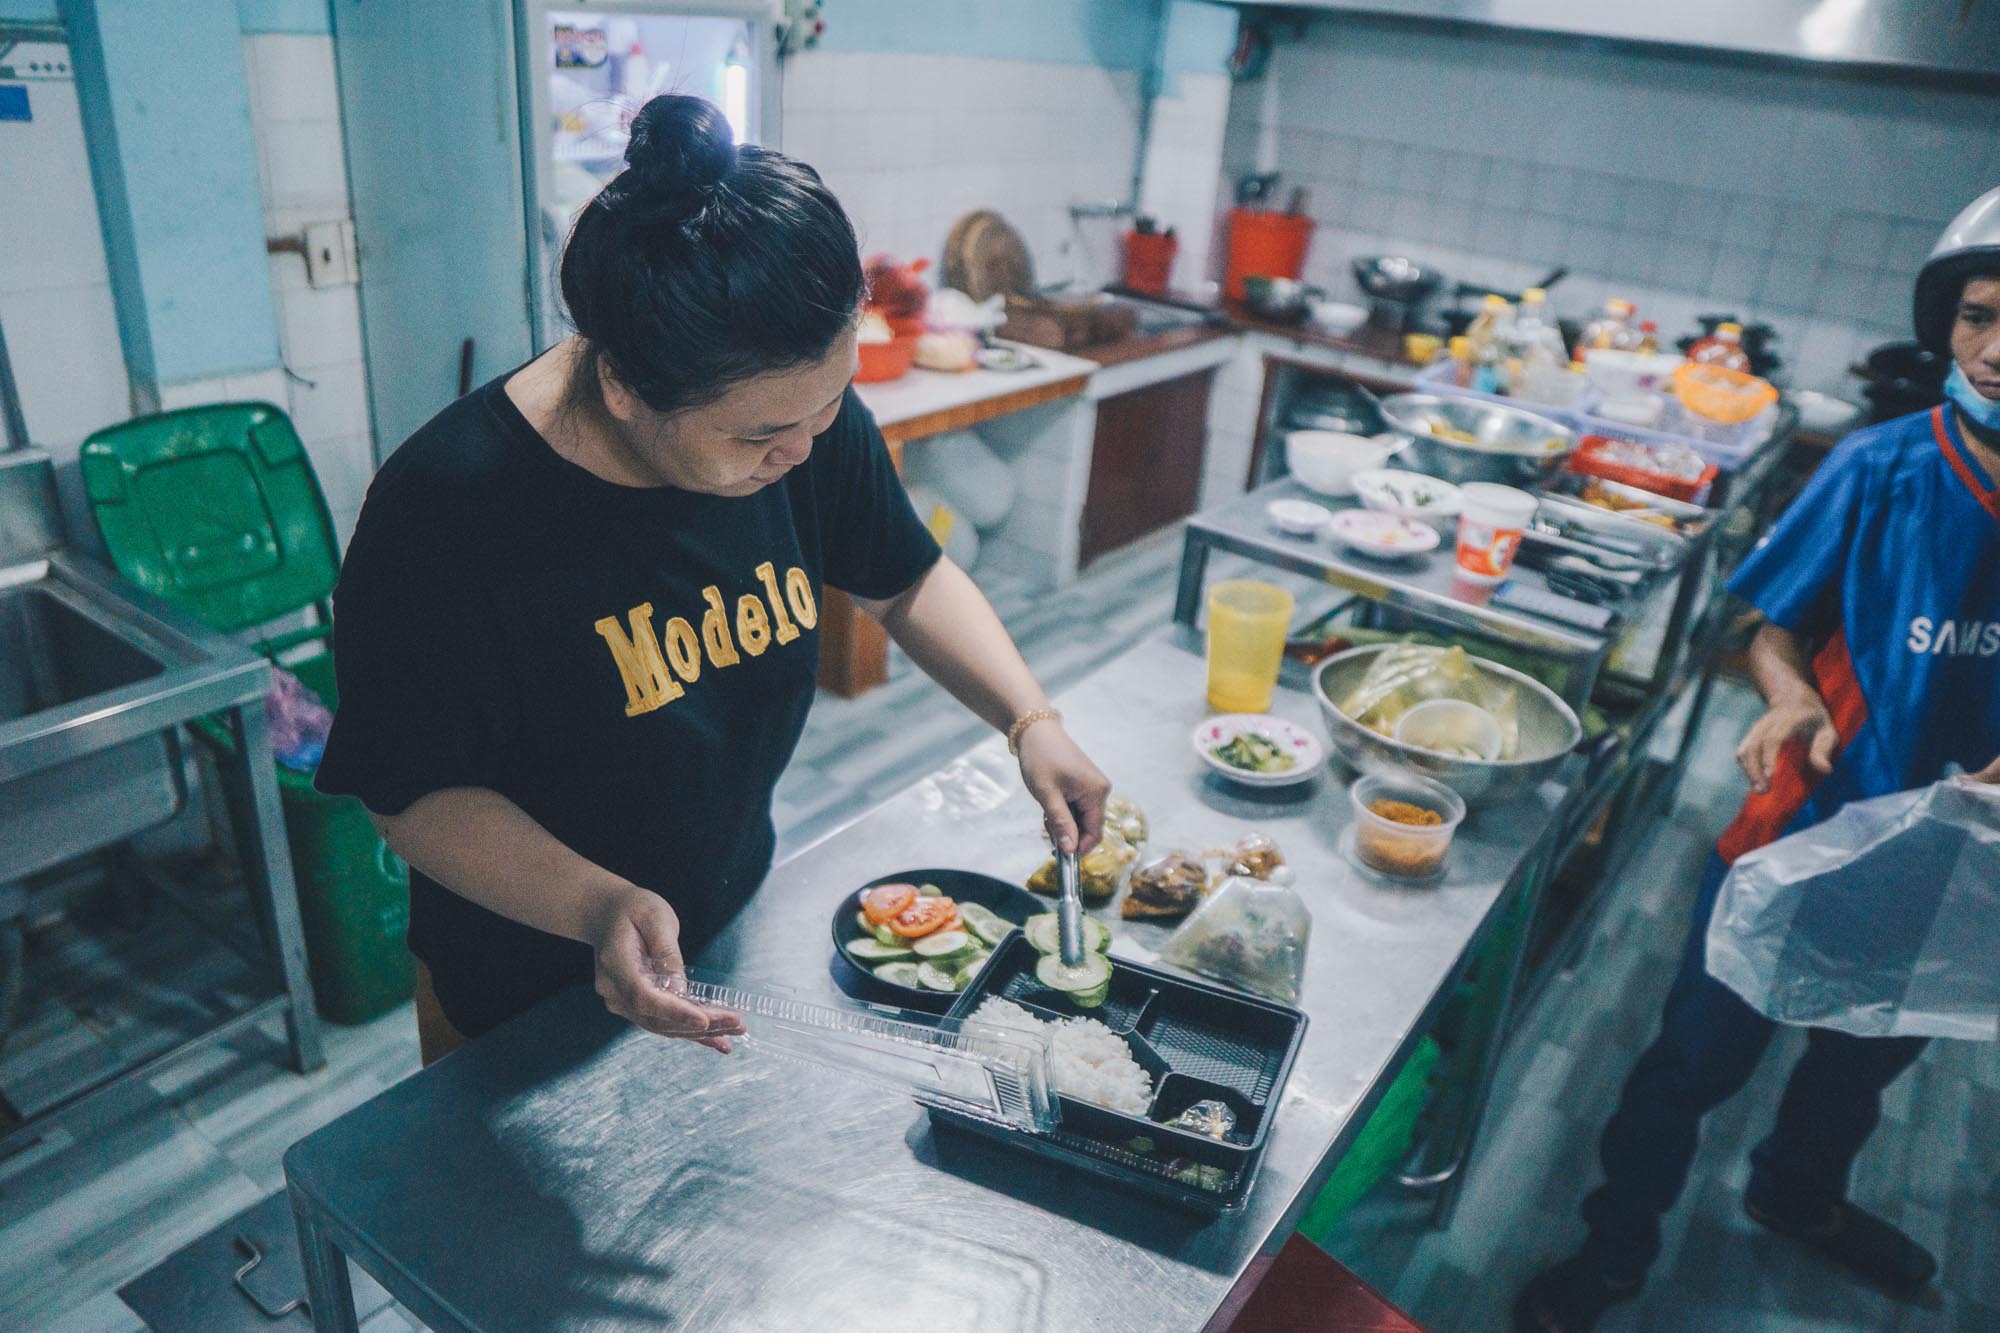 The dishes are typically Vietnamese home-cooked meals within the USD$1-$2 price range. Photo by Nam Quoc Tran